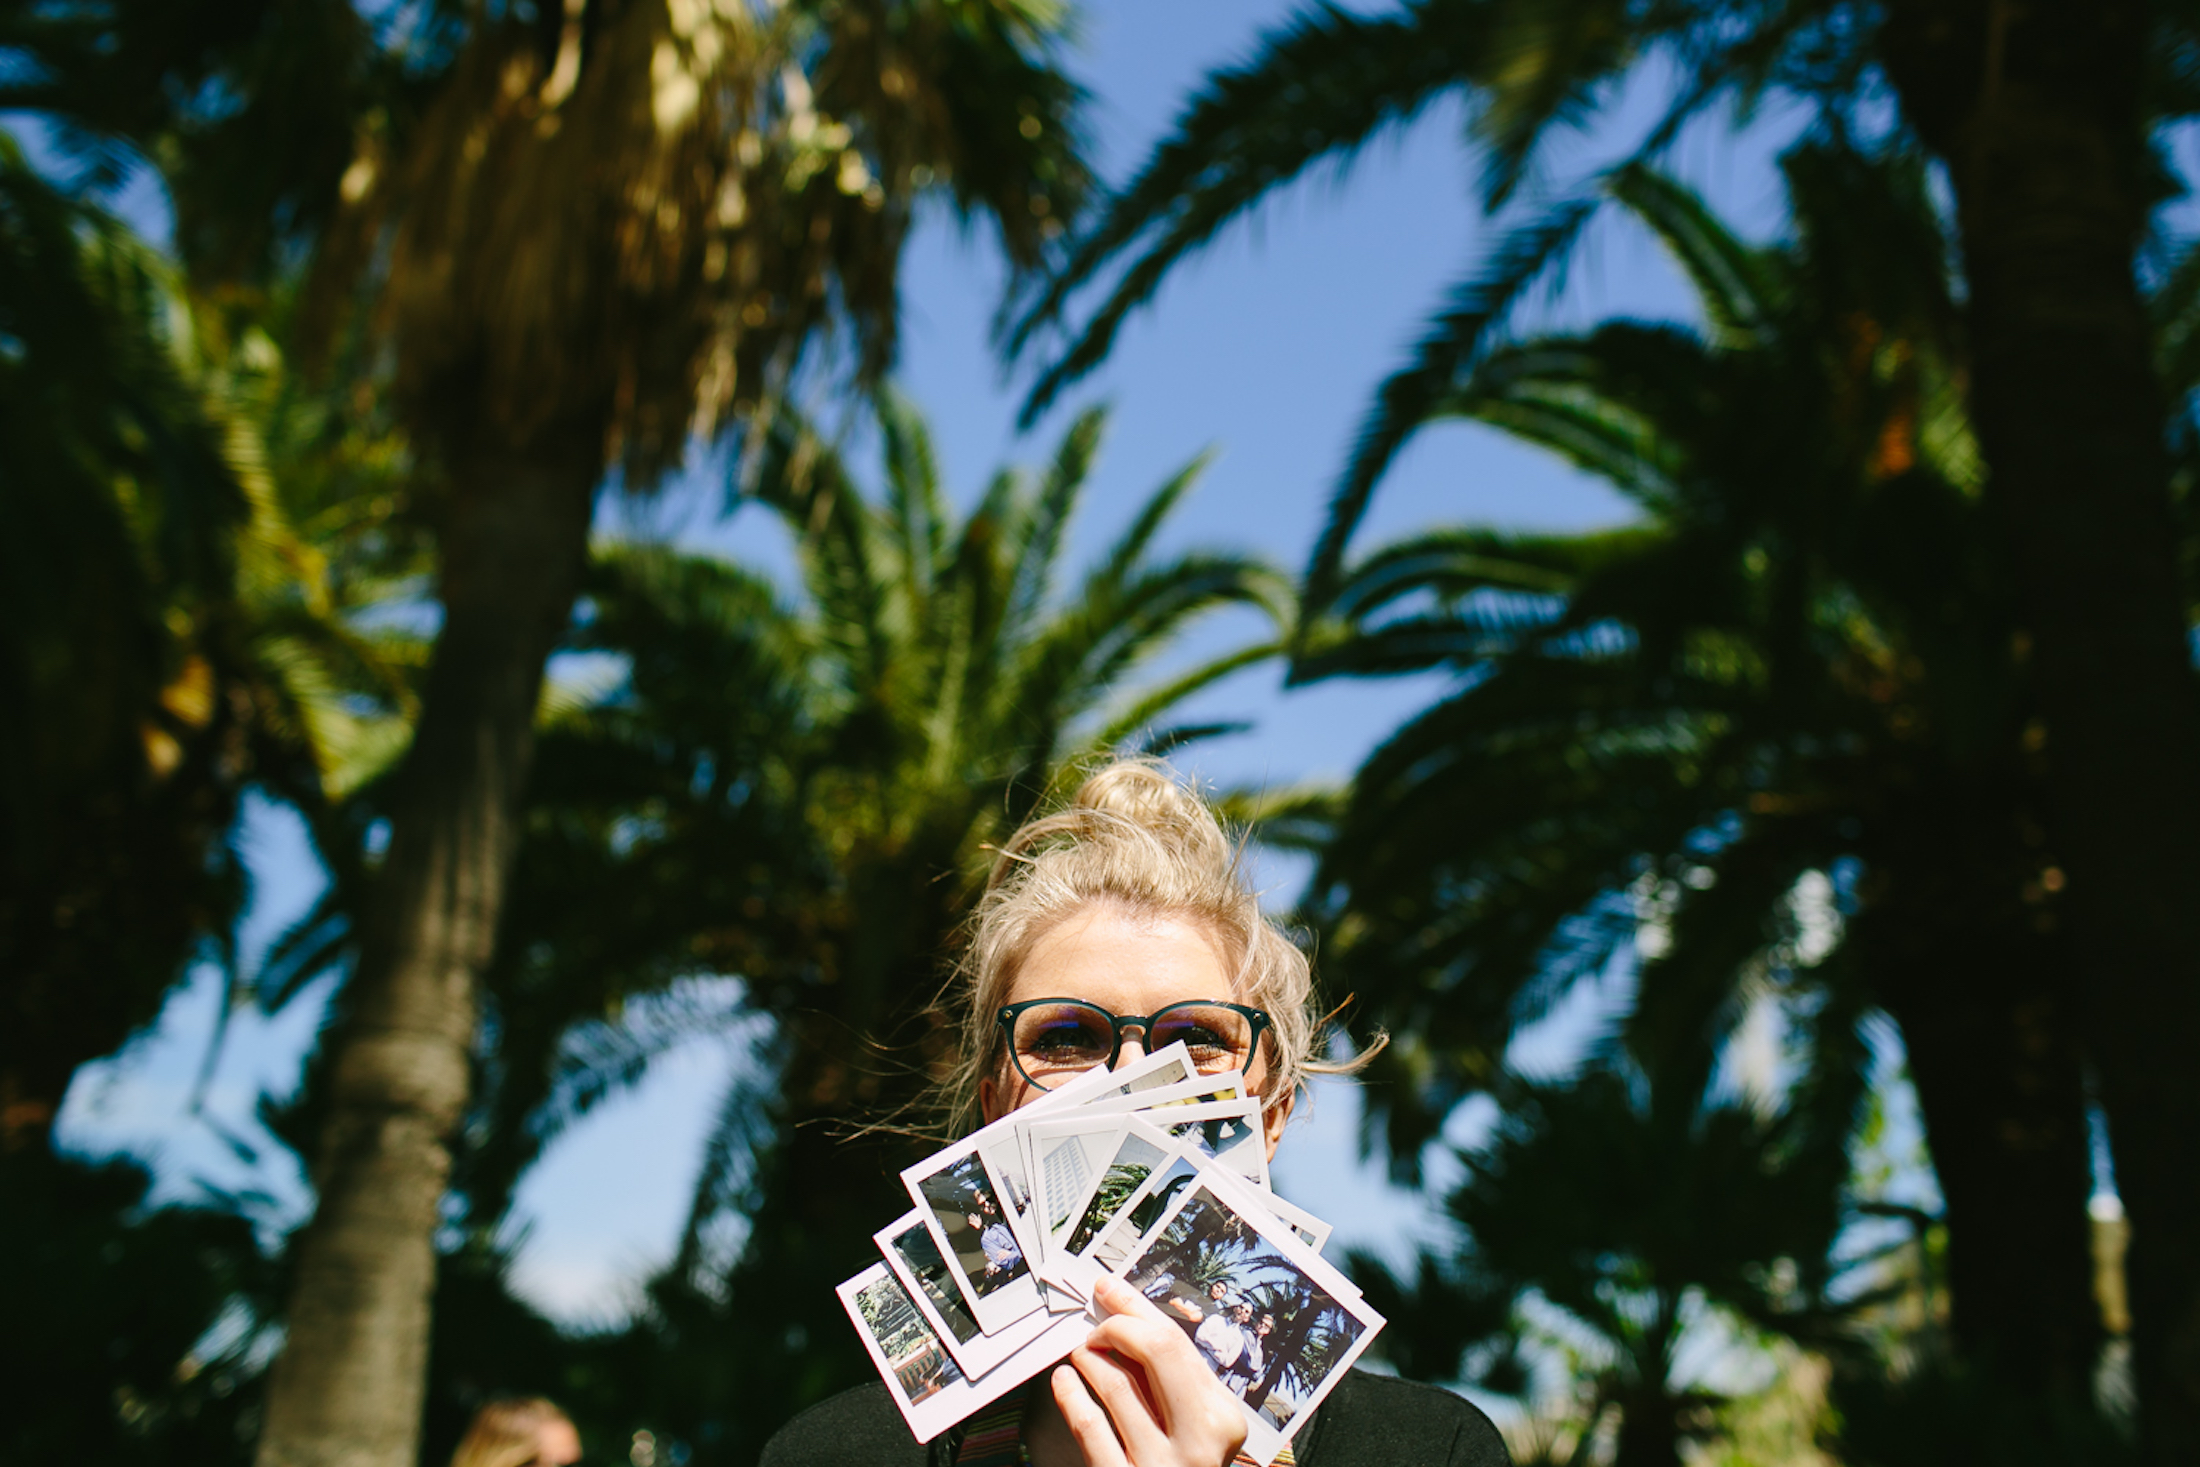  Mankica and her polaroids. Captured by Marian 